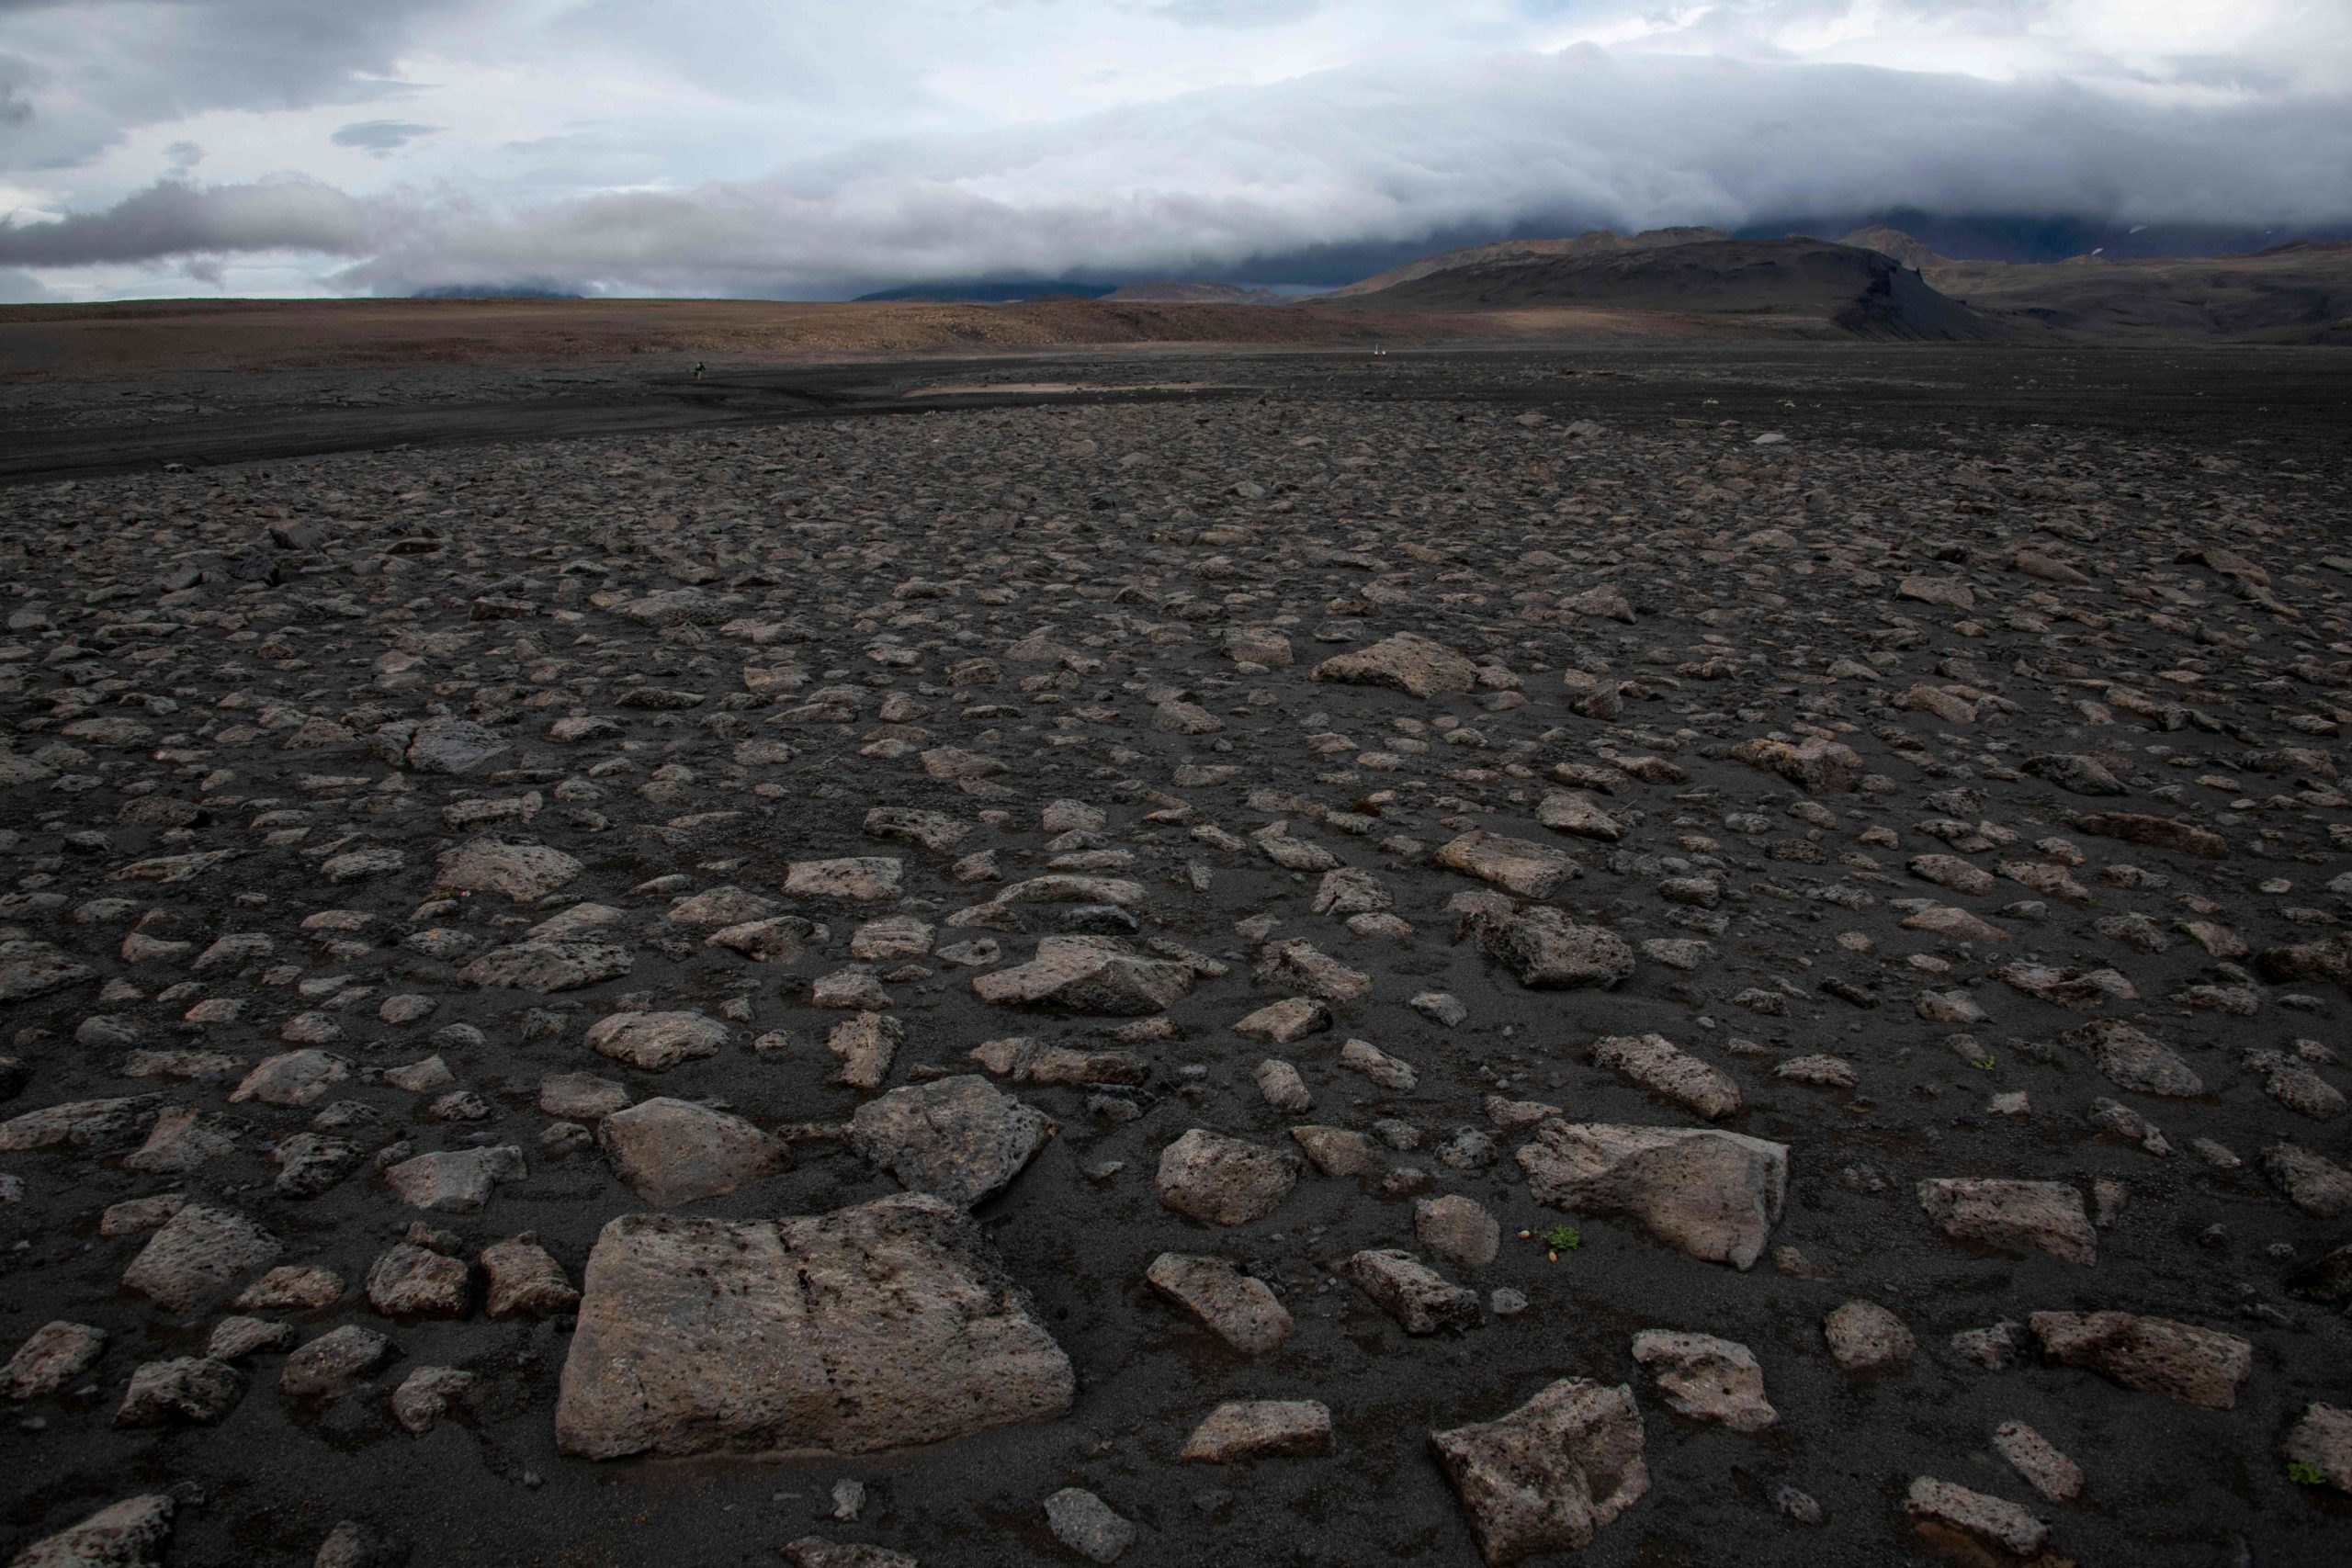 Basalt outcrops, like this one in Iceland, often are used as earthly analogues to Martian settings. (Photo: Photo by HALLDOR KOLBEINS/AFP via Getty Images, Getty Images)